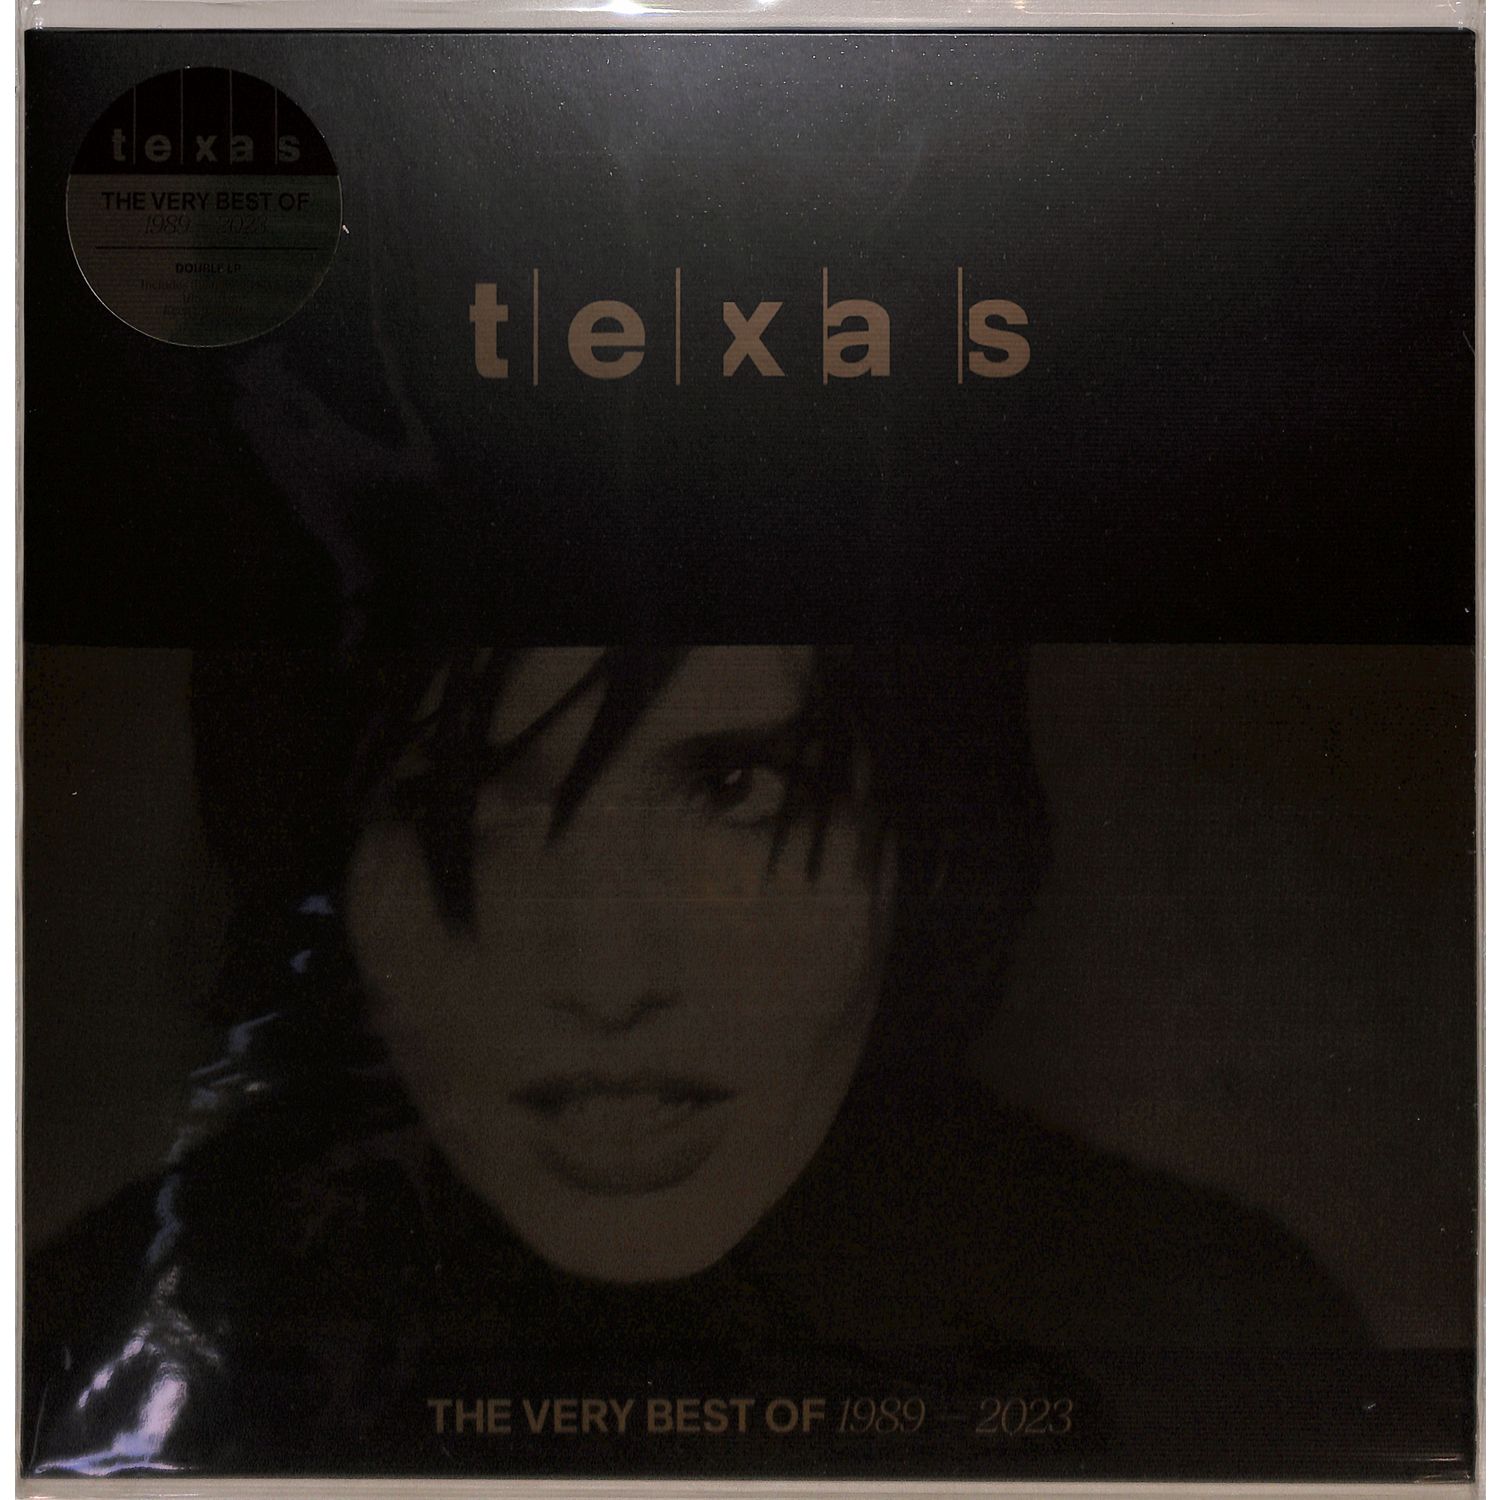 Texas - THE VERY BEST OF 1989 - 2023 